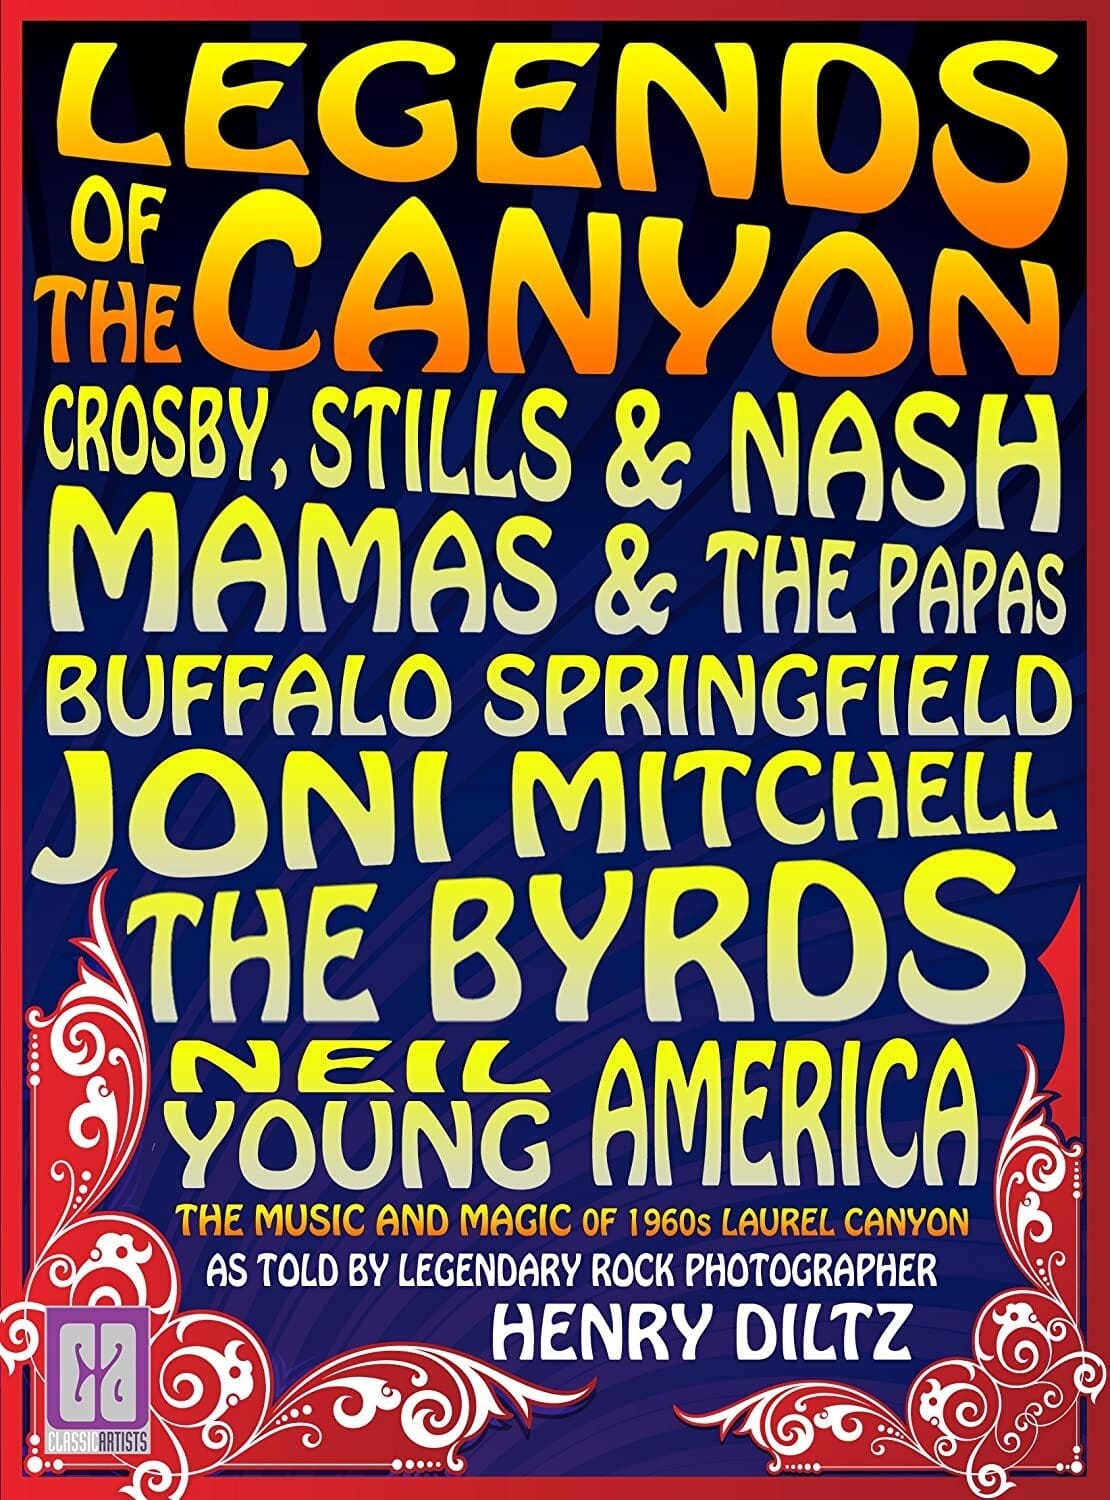 Legends of the Canyon - The Origins of West Coast Rock